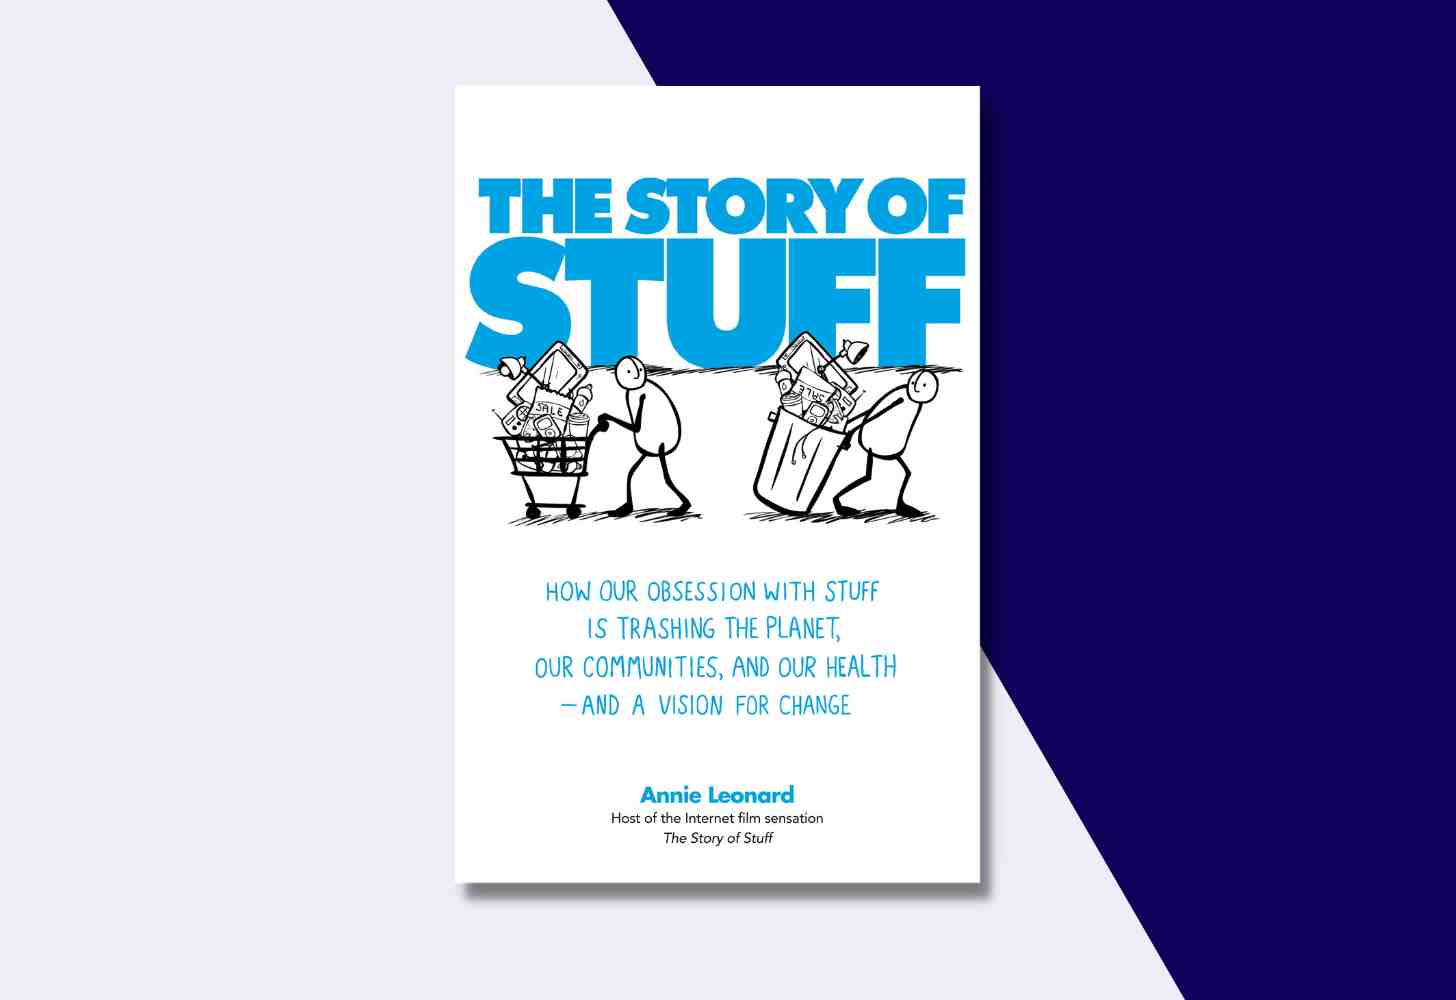 The Cover Of: “The Story of Stuff: How Our Obsession with Stuff Is Trashing the Planet, Our Communities, and Our Health” by Annie Leonard